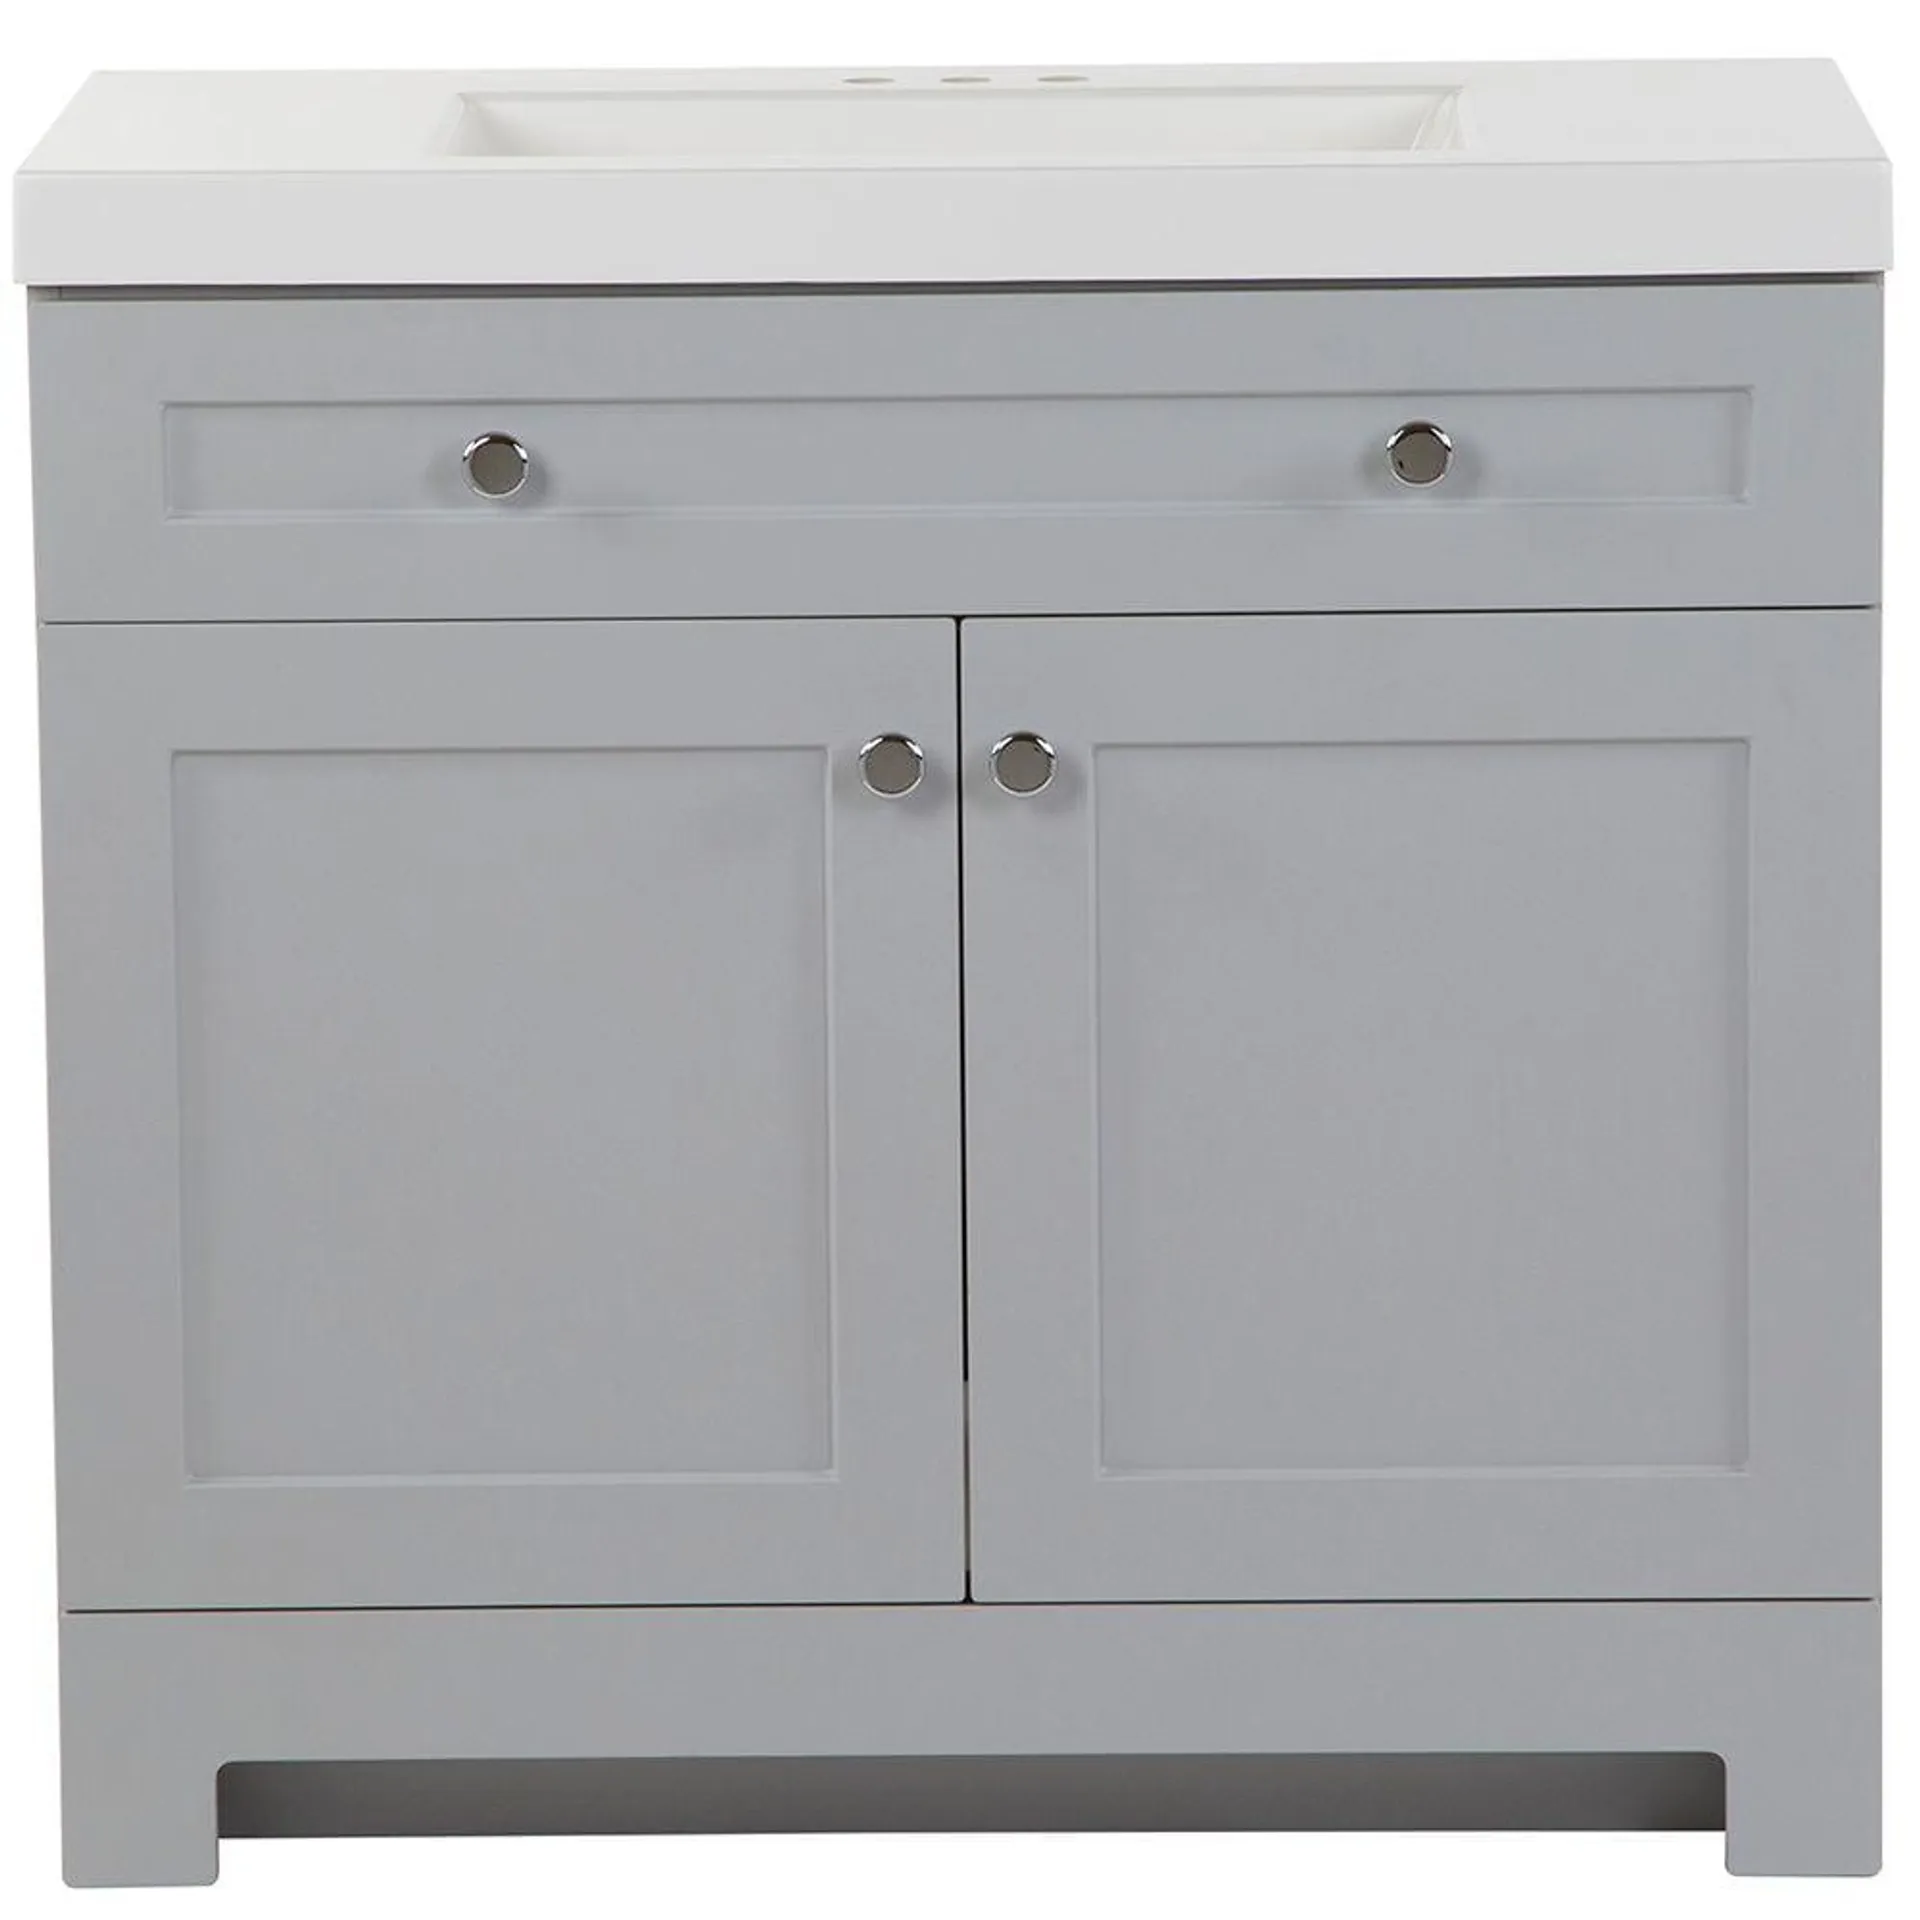 Everdean 36.5-inch W x 34.4-inch H x 18.75-inch D Bathroom Vanity in Pearl Grey with Cultured Marble Countertop/Rectangular Sink